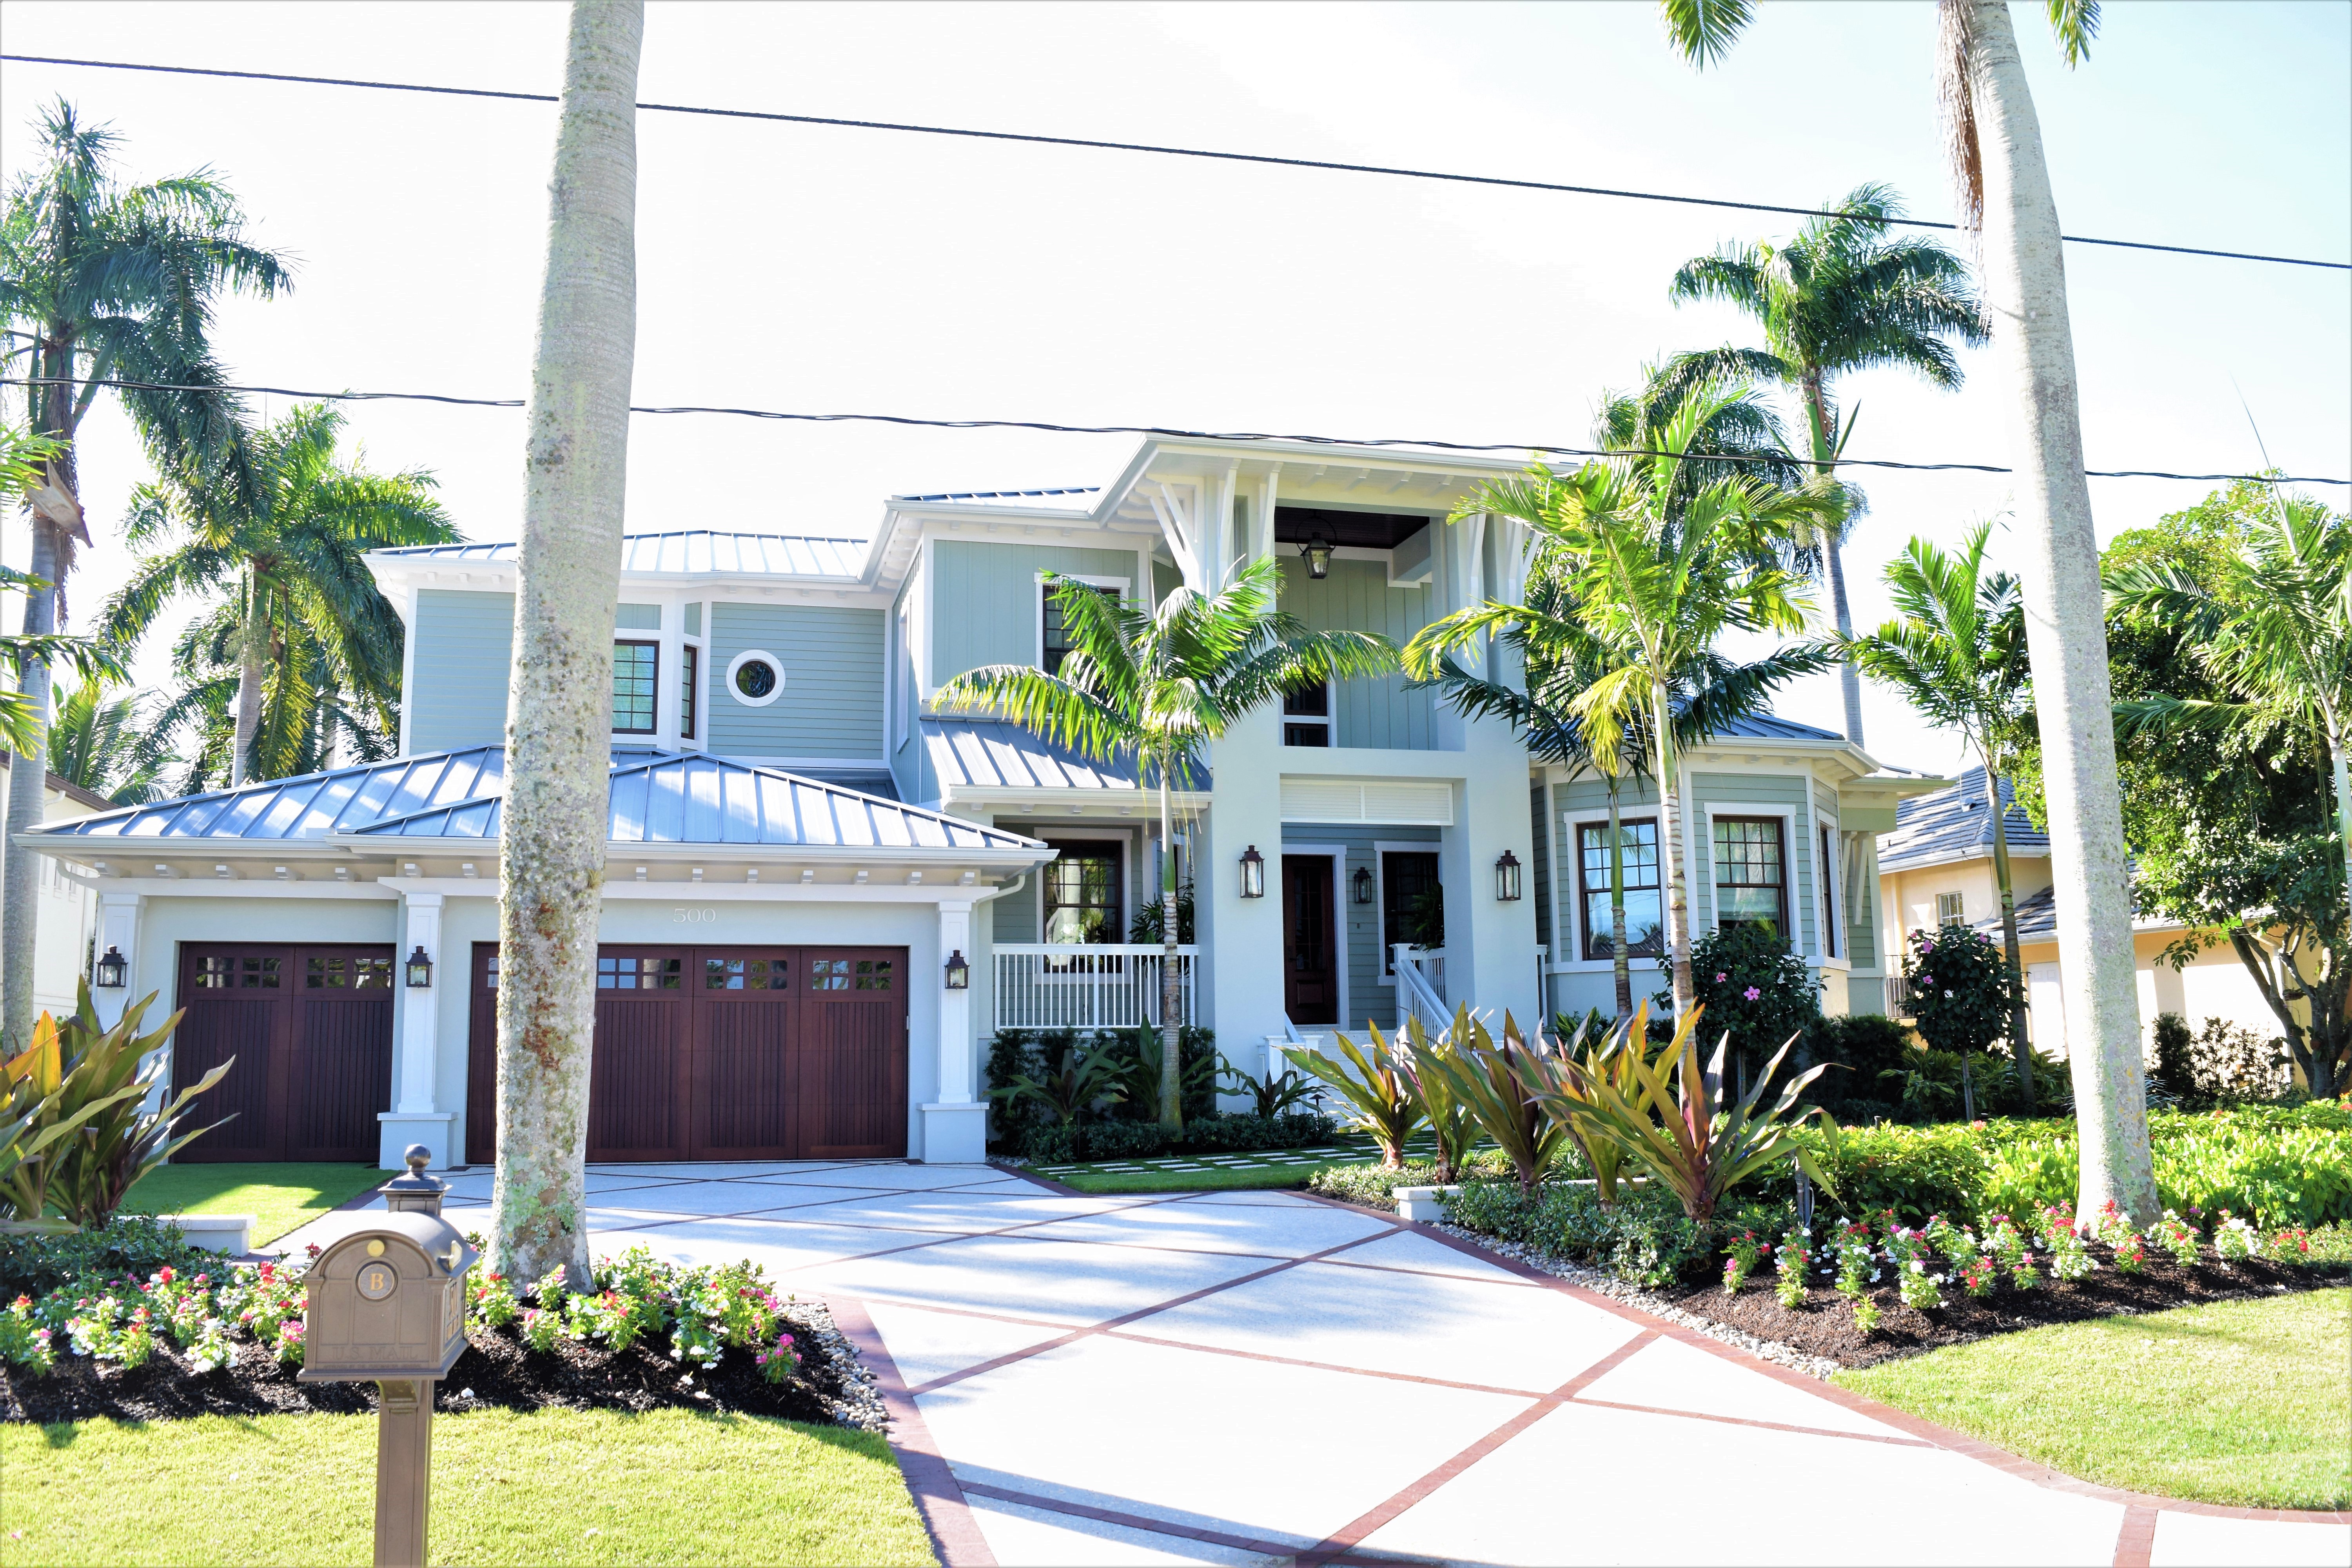 Residential Property Management in and near Estero Florida